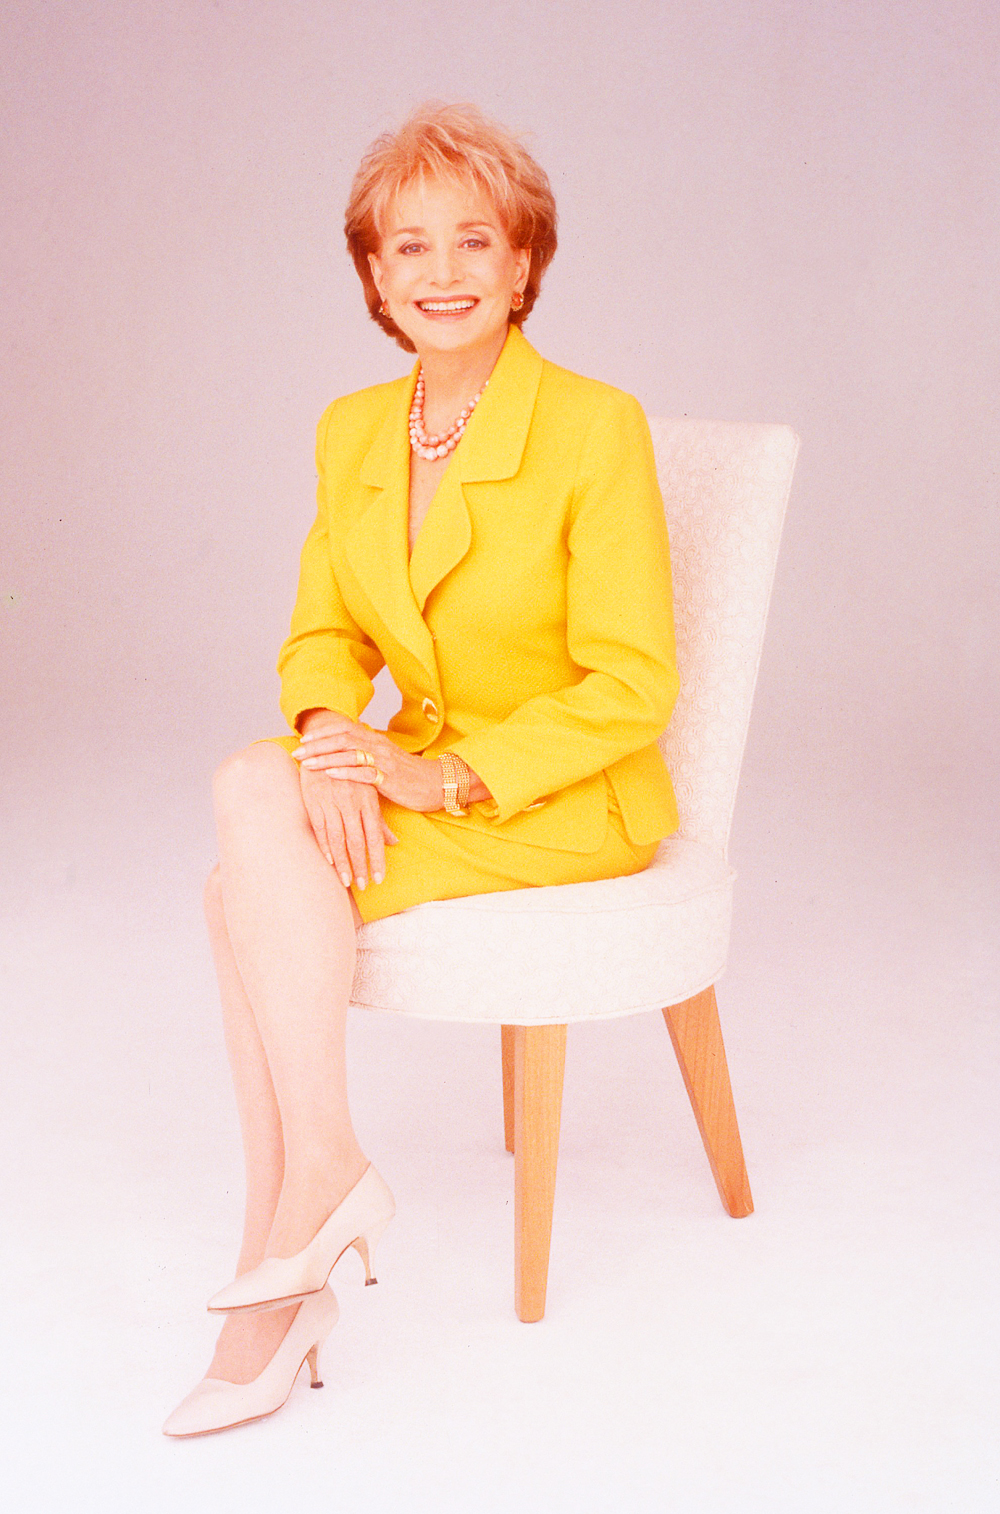 THE VIEW，Barbara Walters，1997-。照片：Andrew Eccles / © ABC / 礼貌：Everett Collection